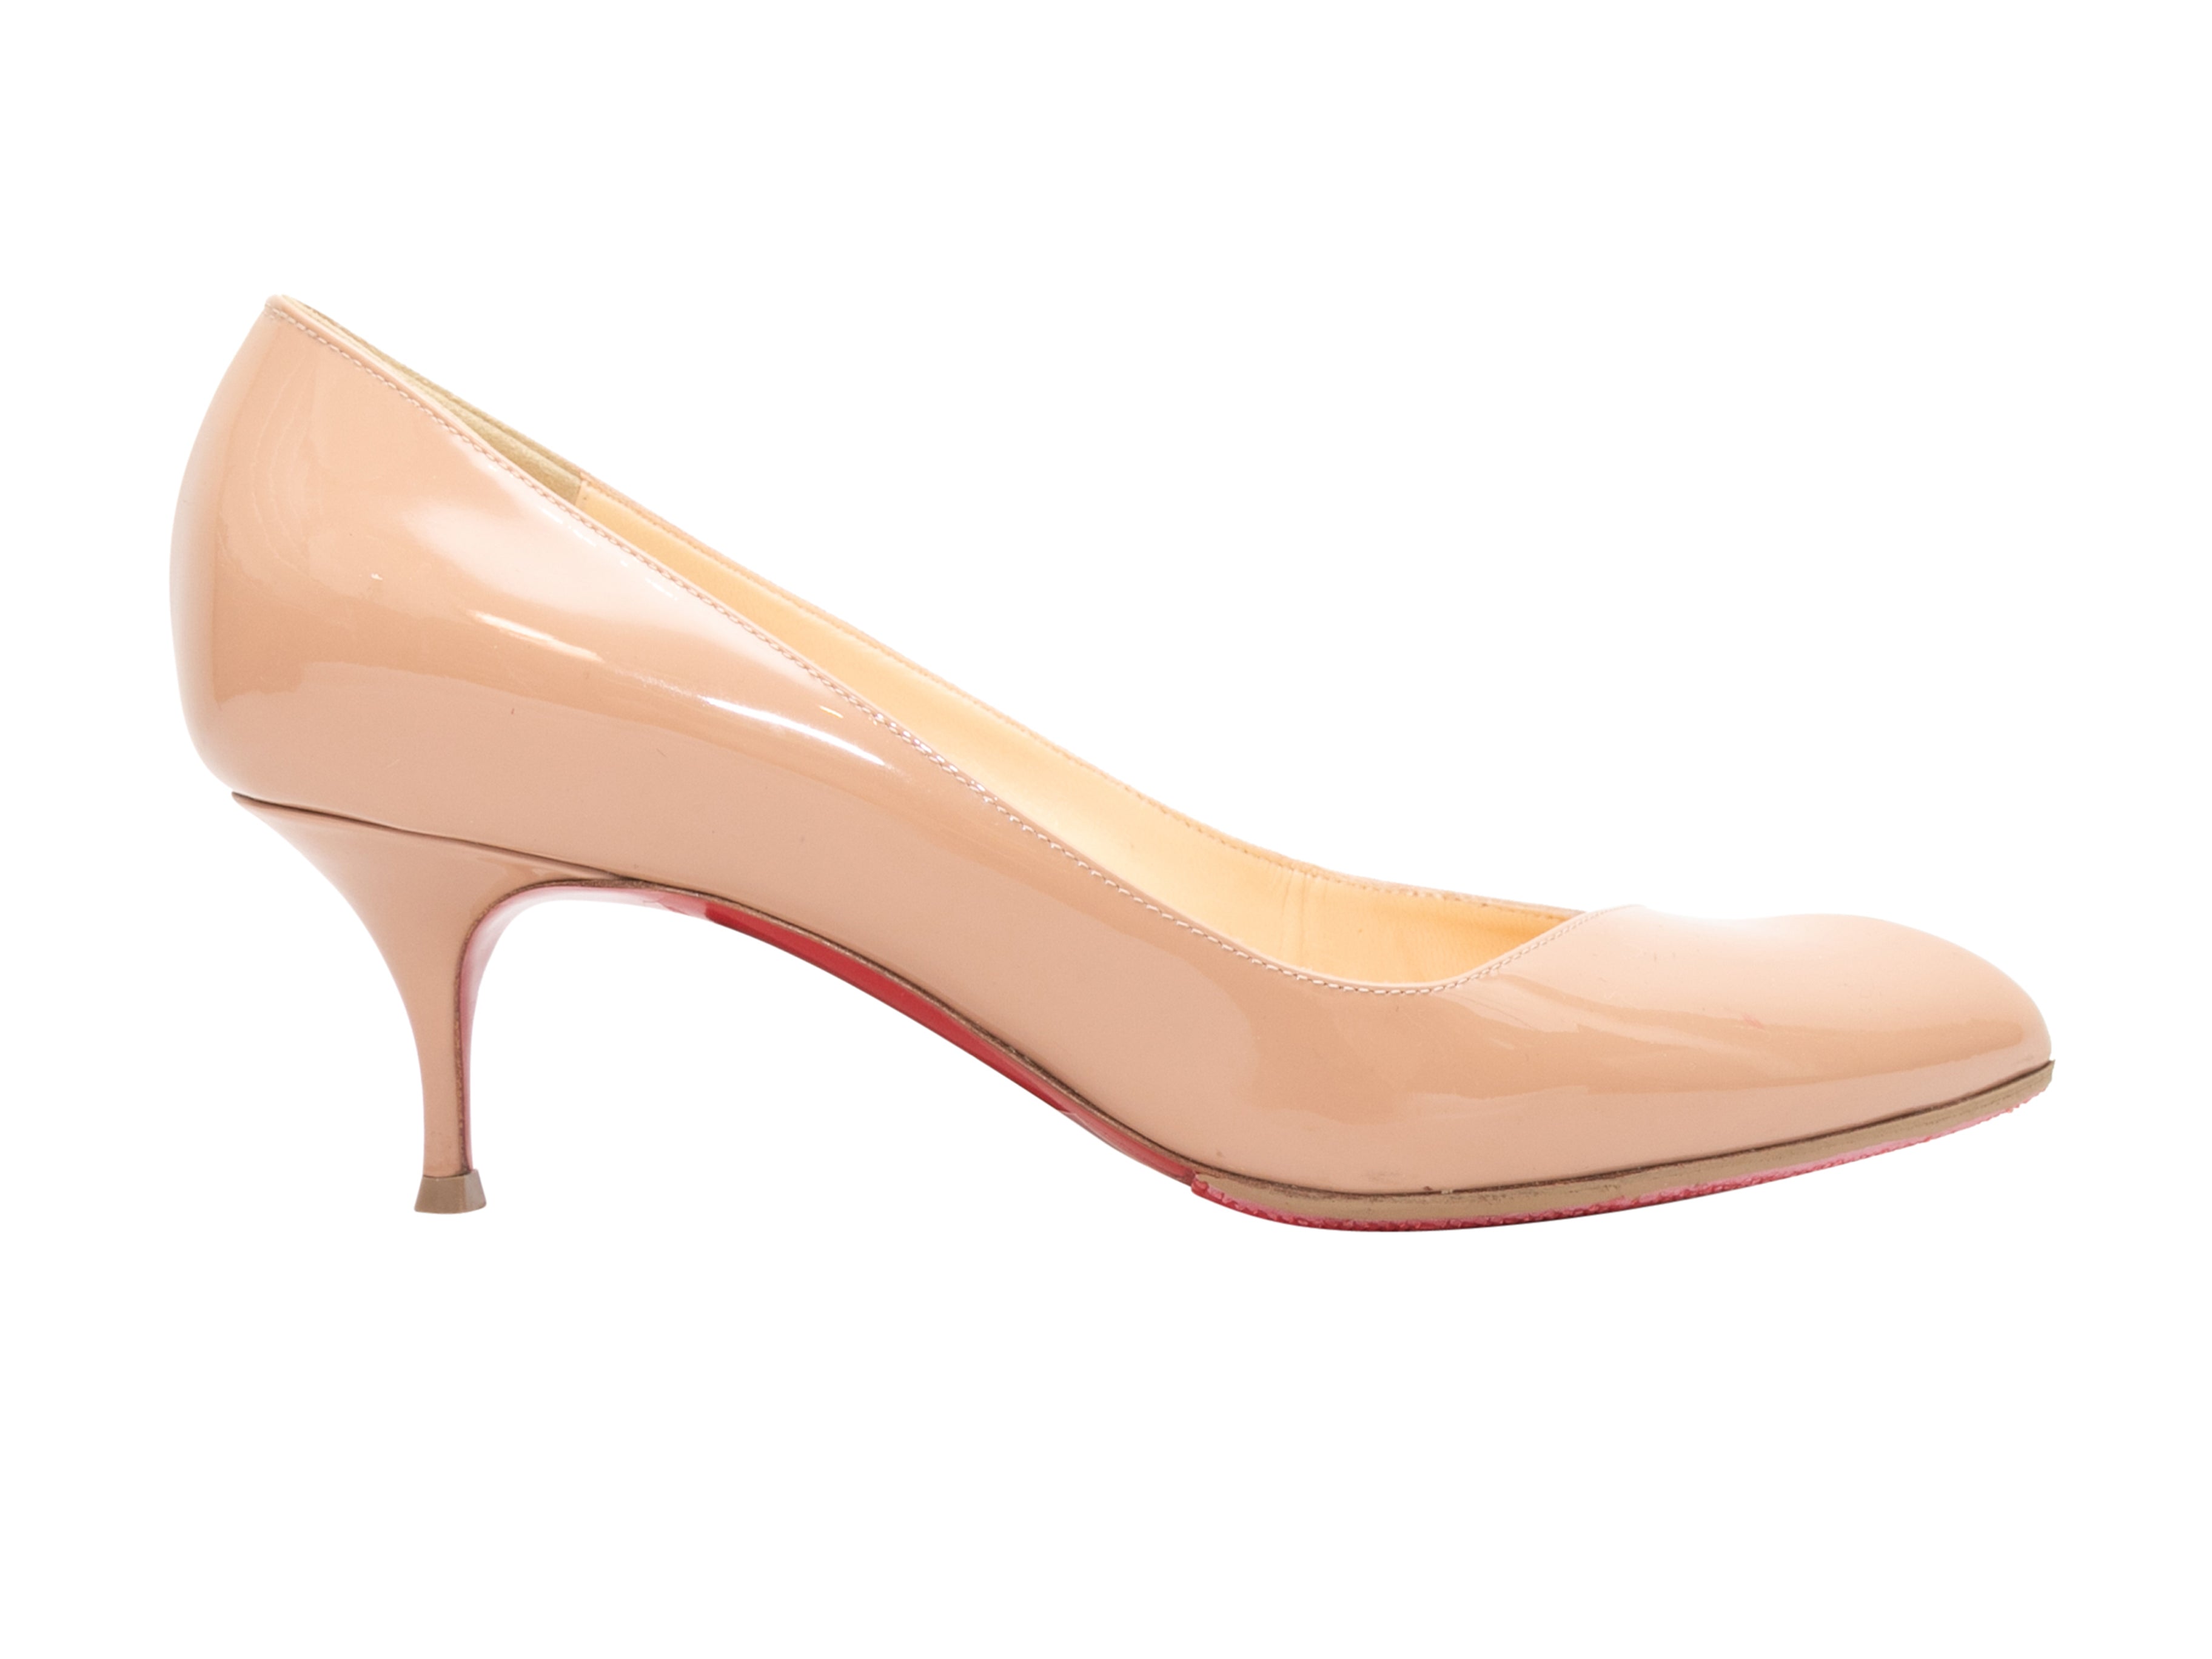 Christian Louboutin - Authenticated Heel - Patent Leather Beige Plain for Women, Very Good Condition